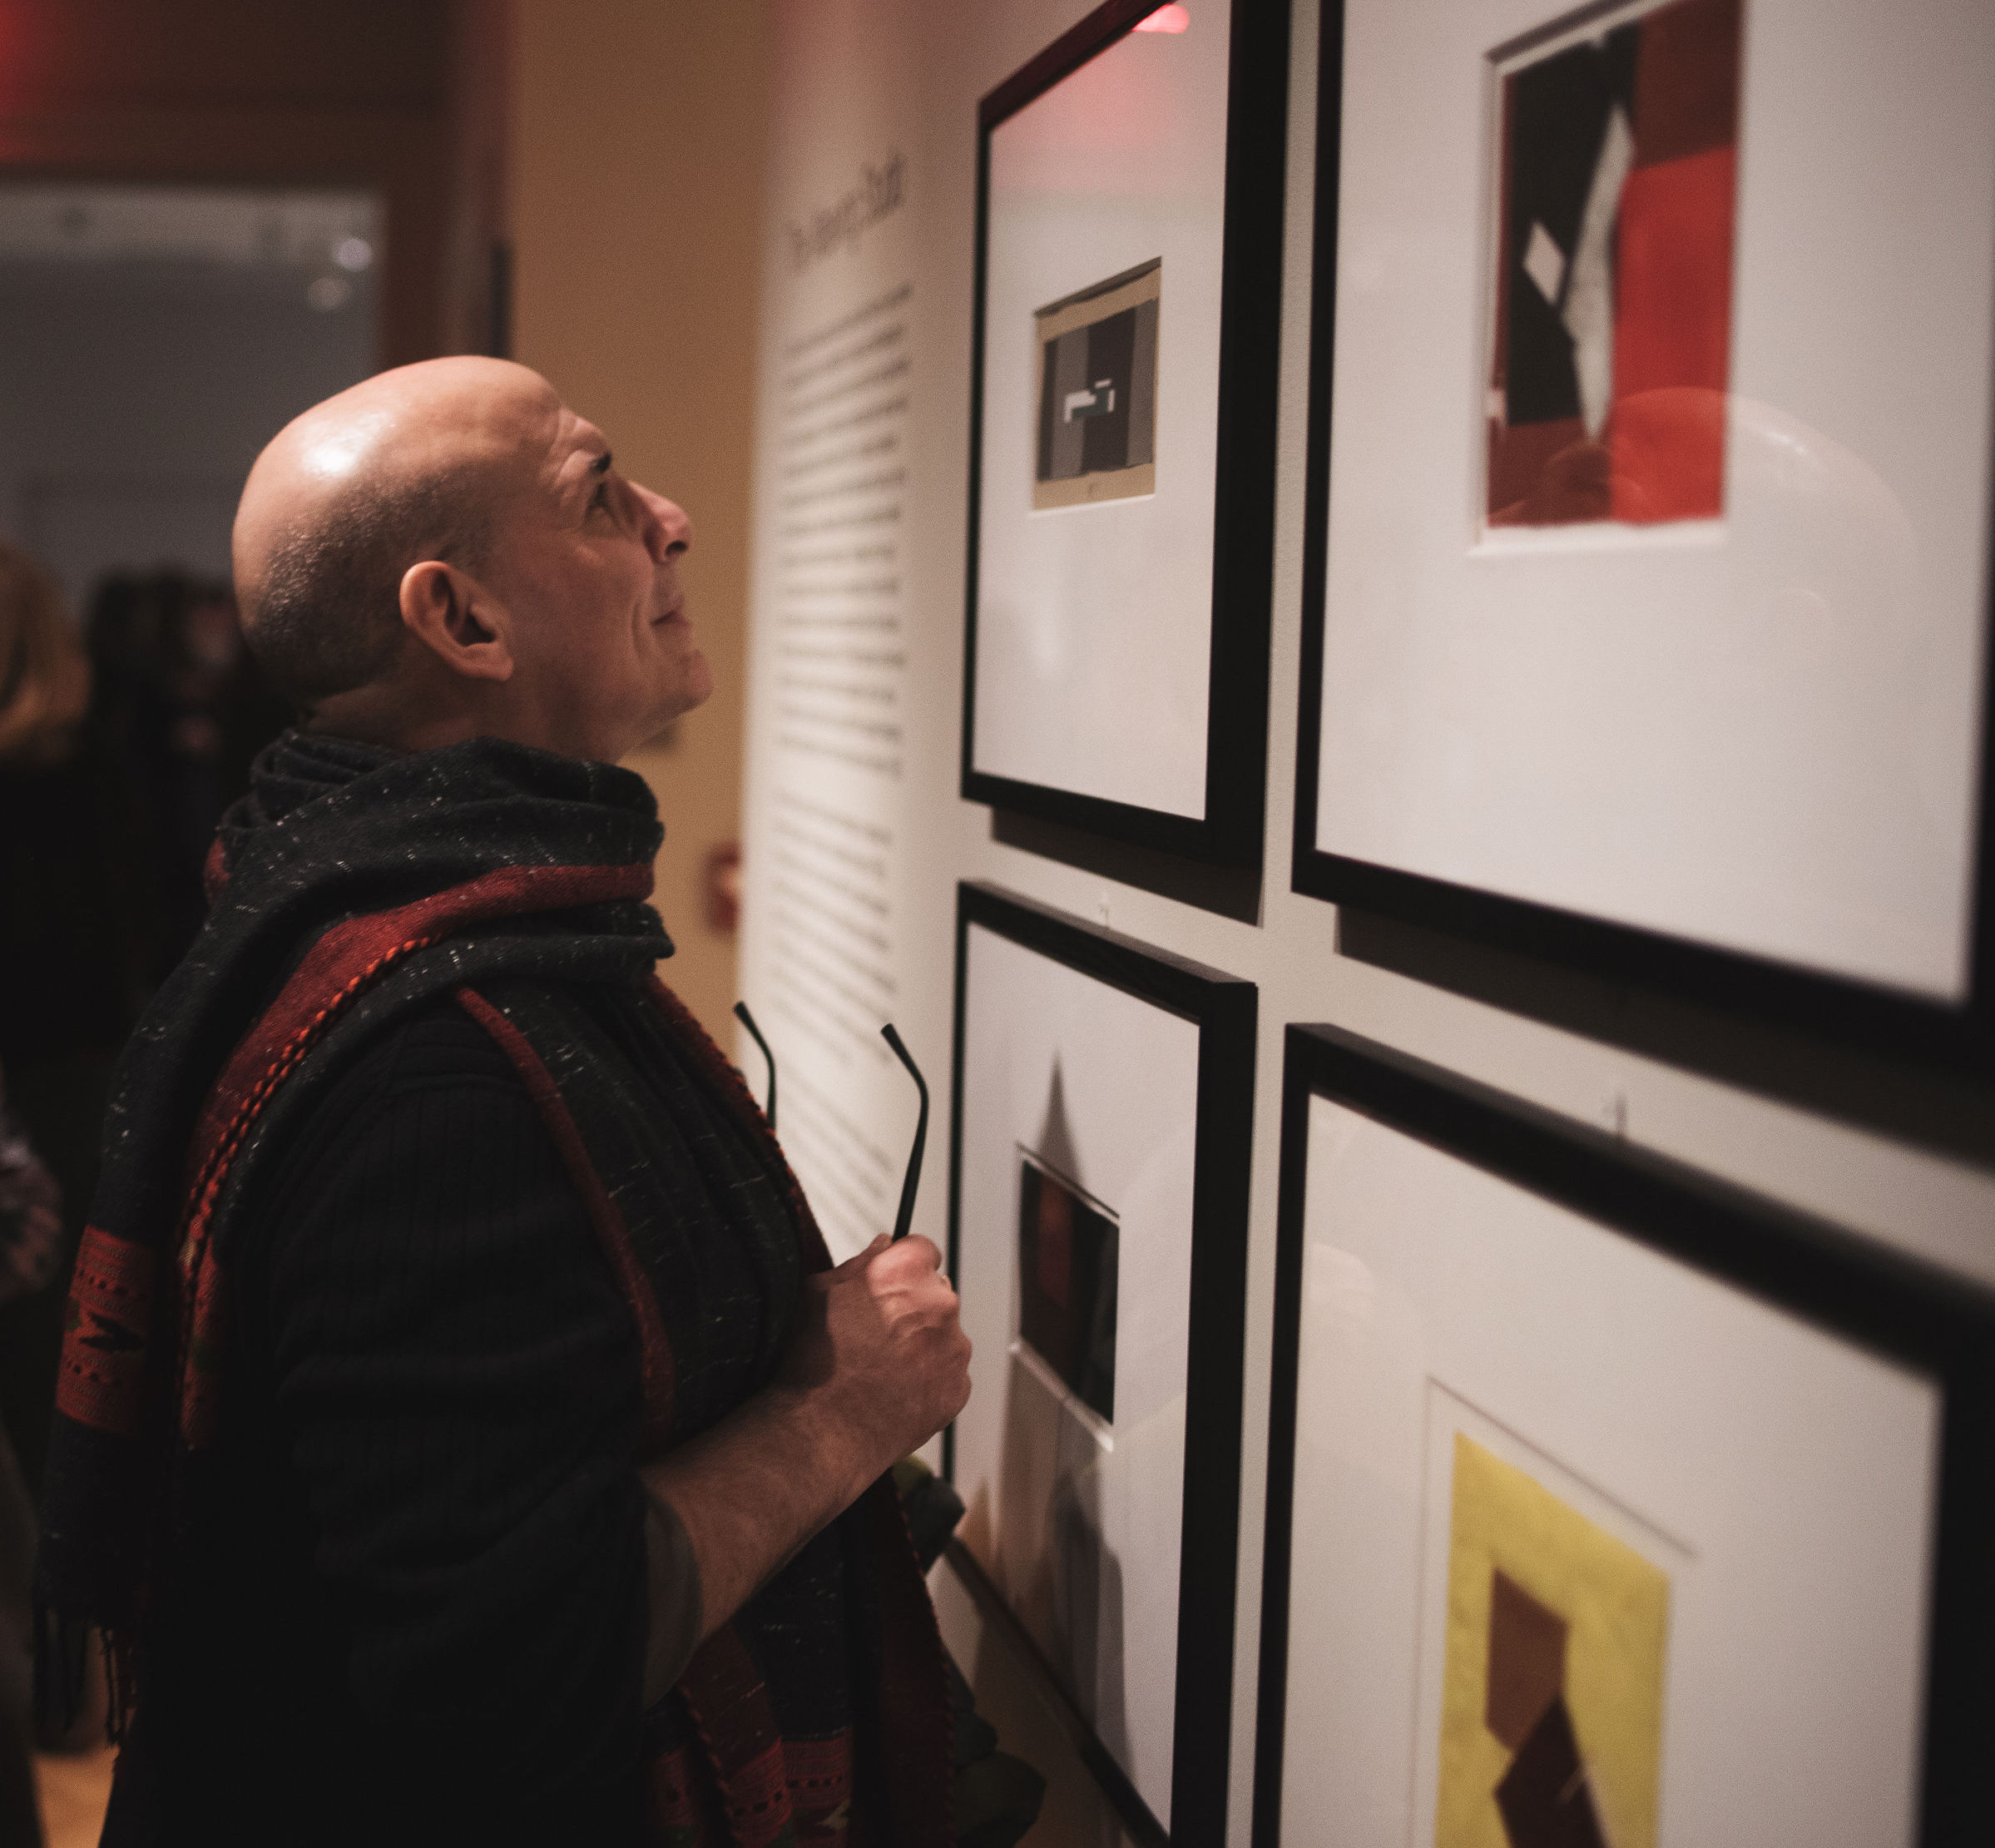 Photograph of a man examining framed works at the opening of the Eileen Gray exhibition.